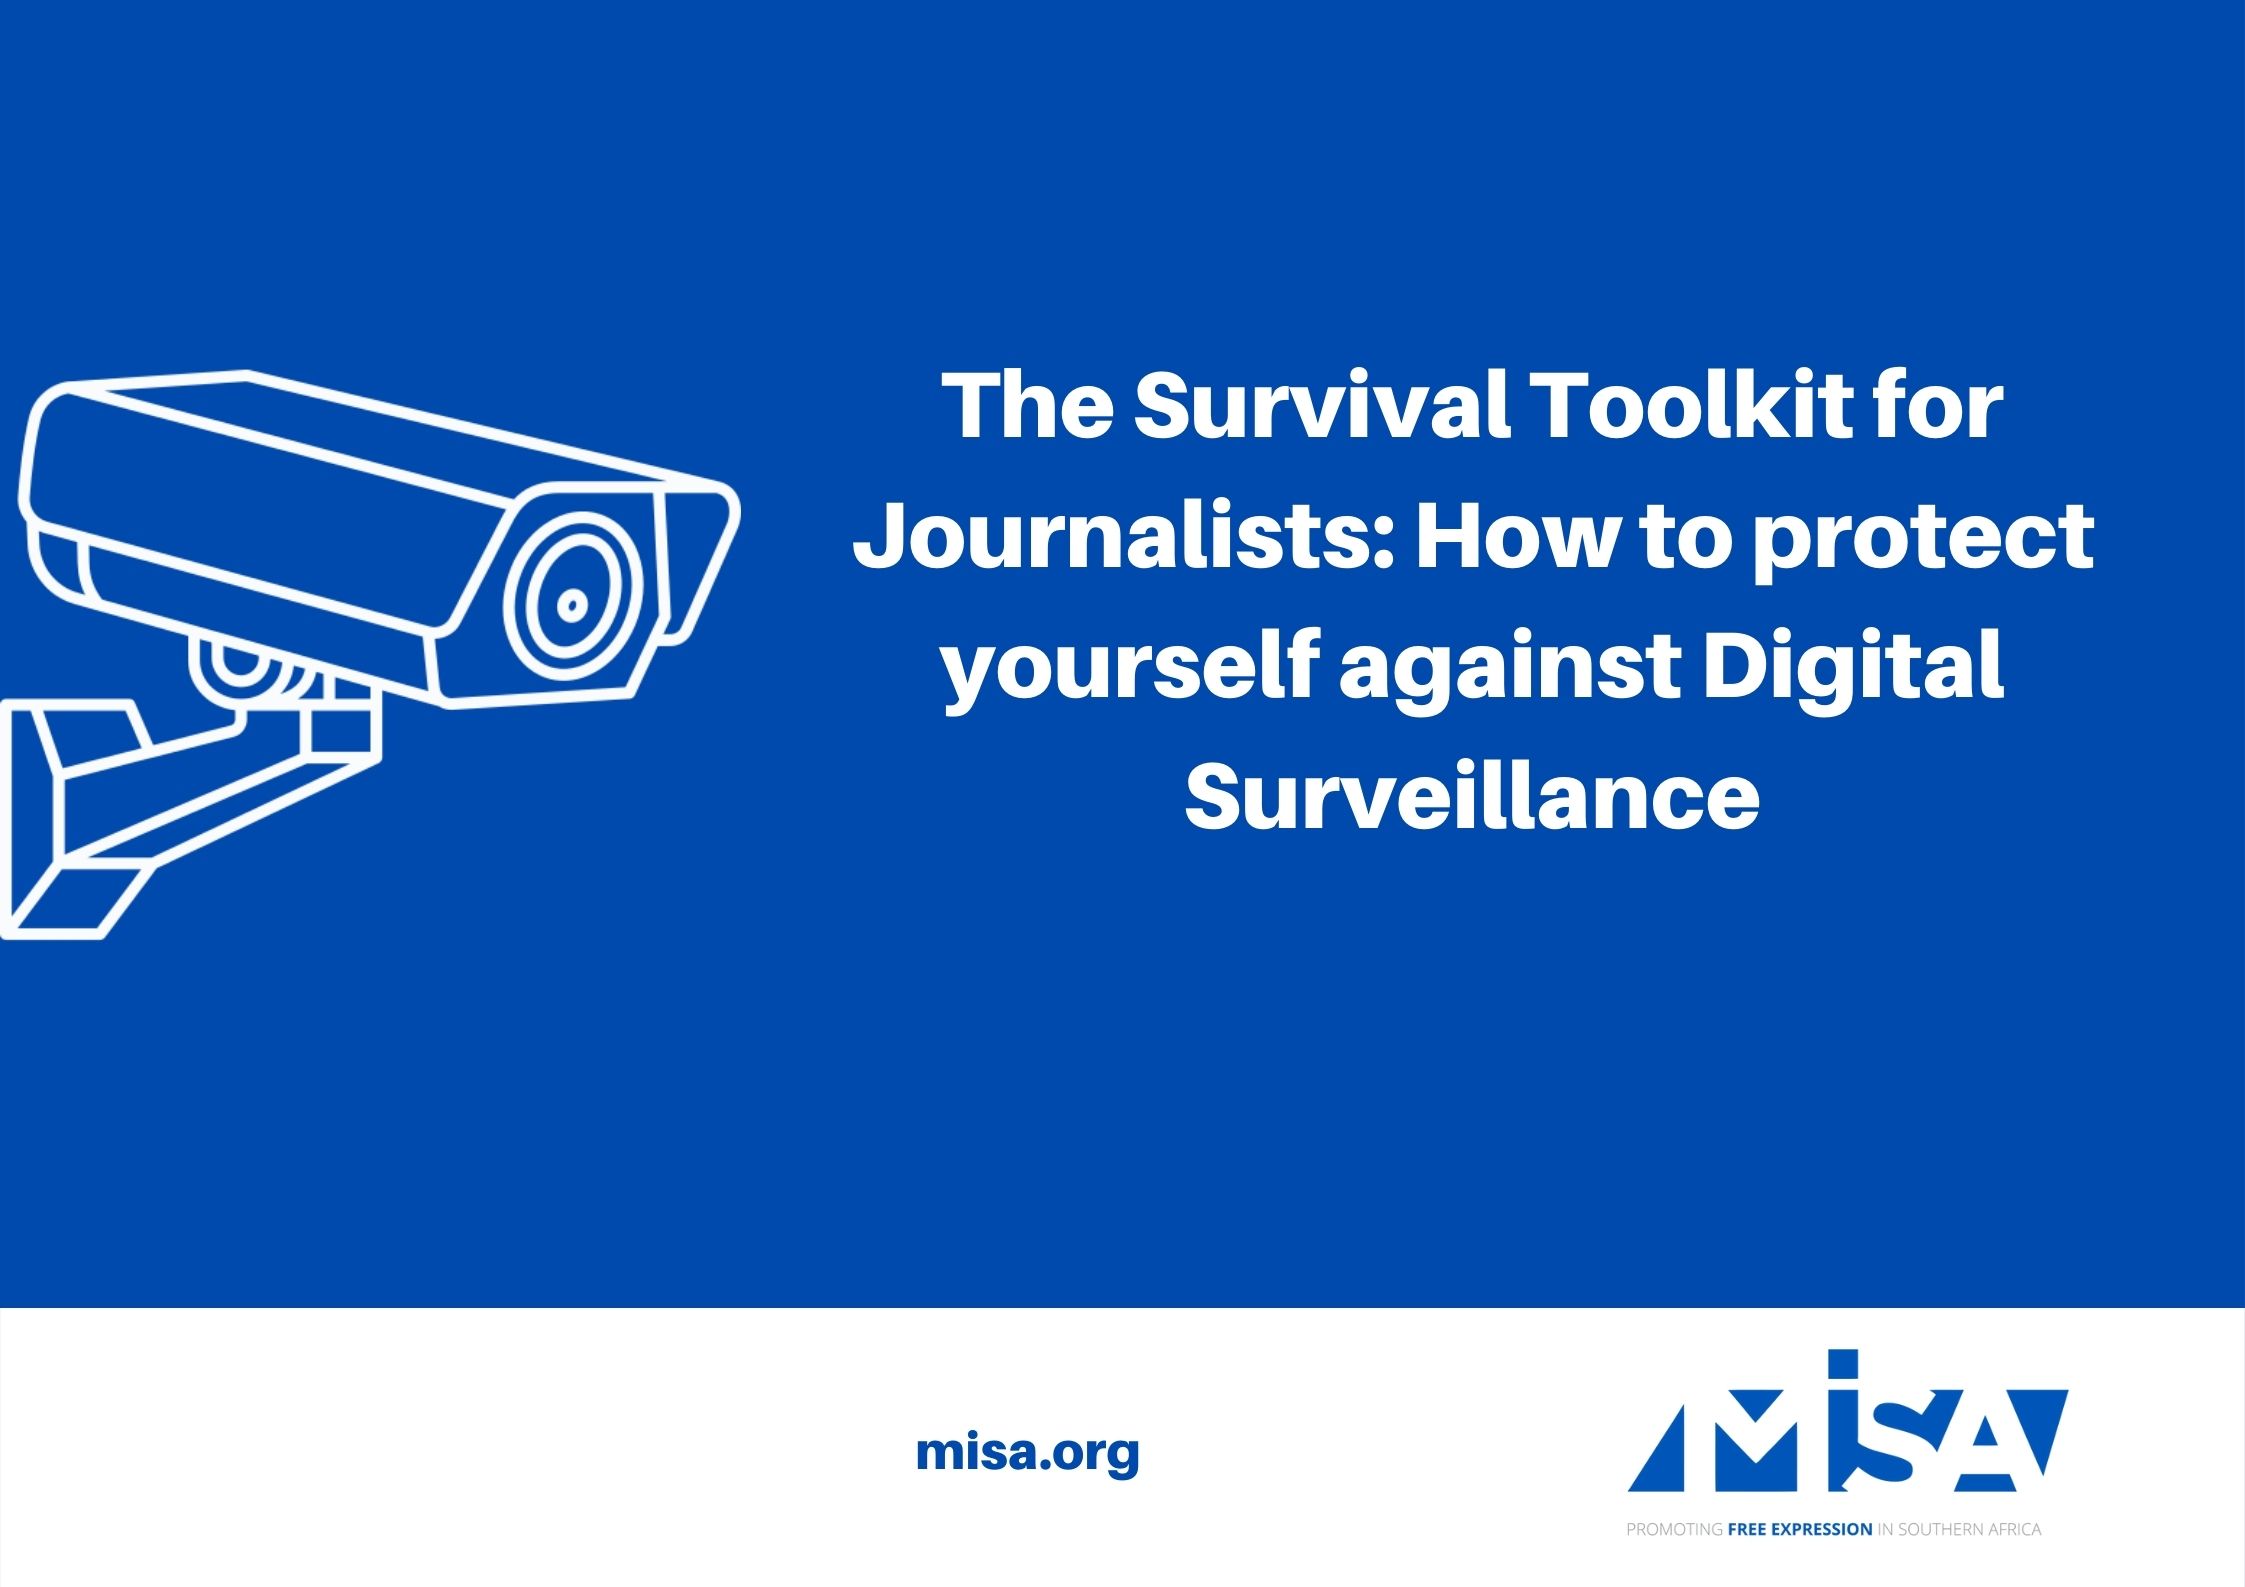 The Survival Toolkit for Journalists: How to protect yourself against Digital Surveillance